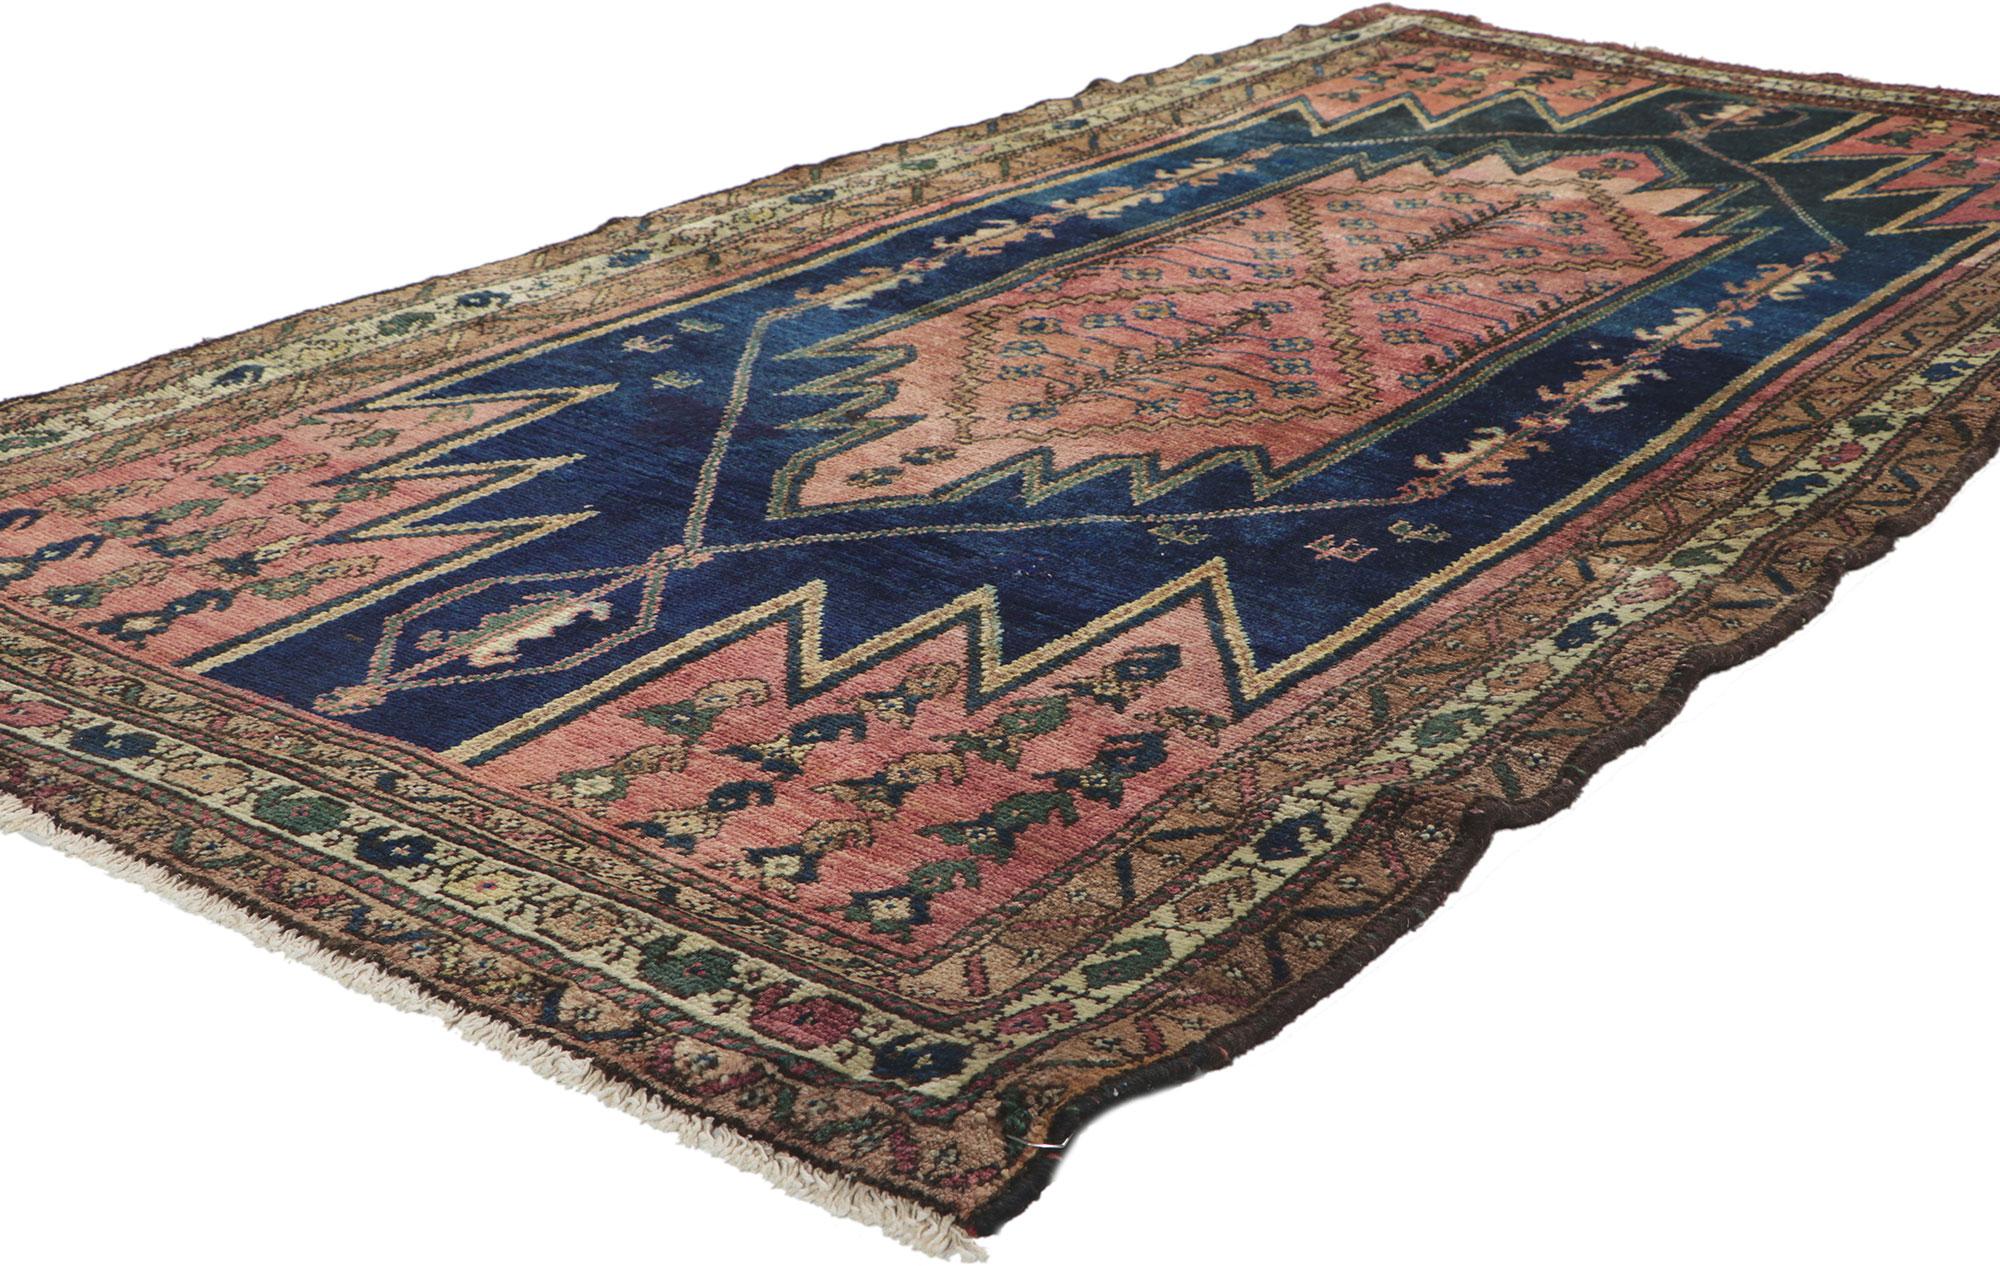 ?61166 Antique Persian Malayer rug, 03'06 x 06'11.
With its timeless style, incredible detail and texture, this hand knotted antique Persian Malayer rug is a captivating vision of woven beauty. The tribal design and atmospheric colorway woven into